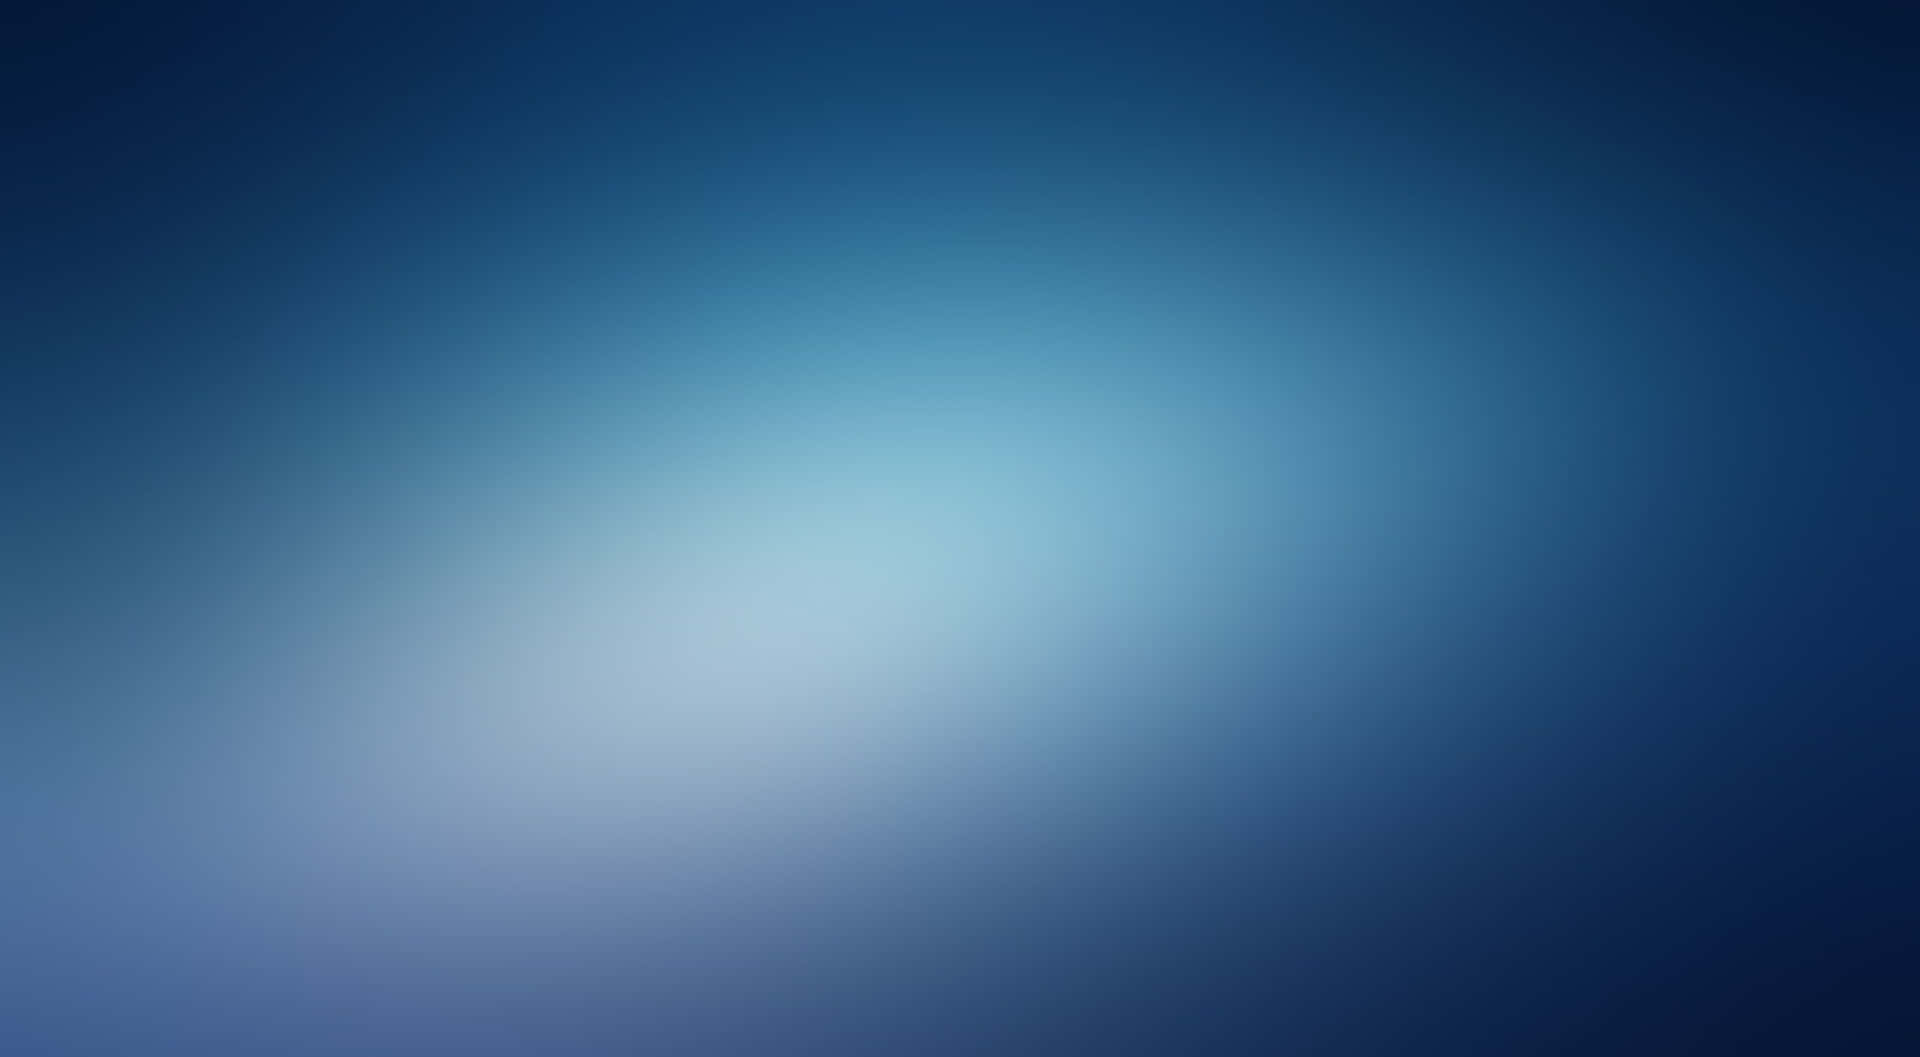 A Blue Blurry Background With A Light Blue Color